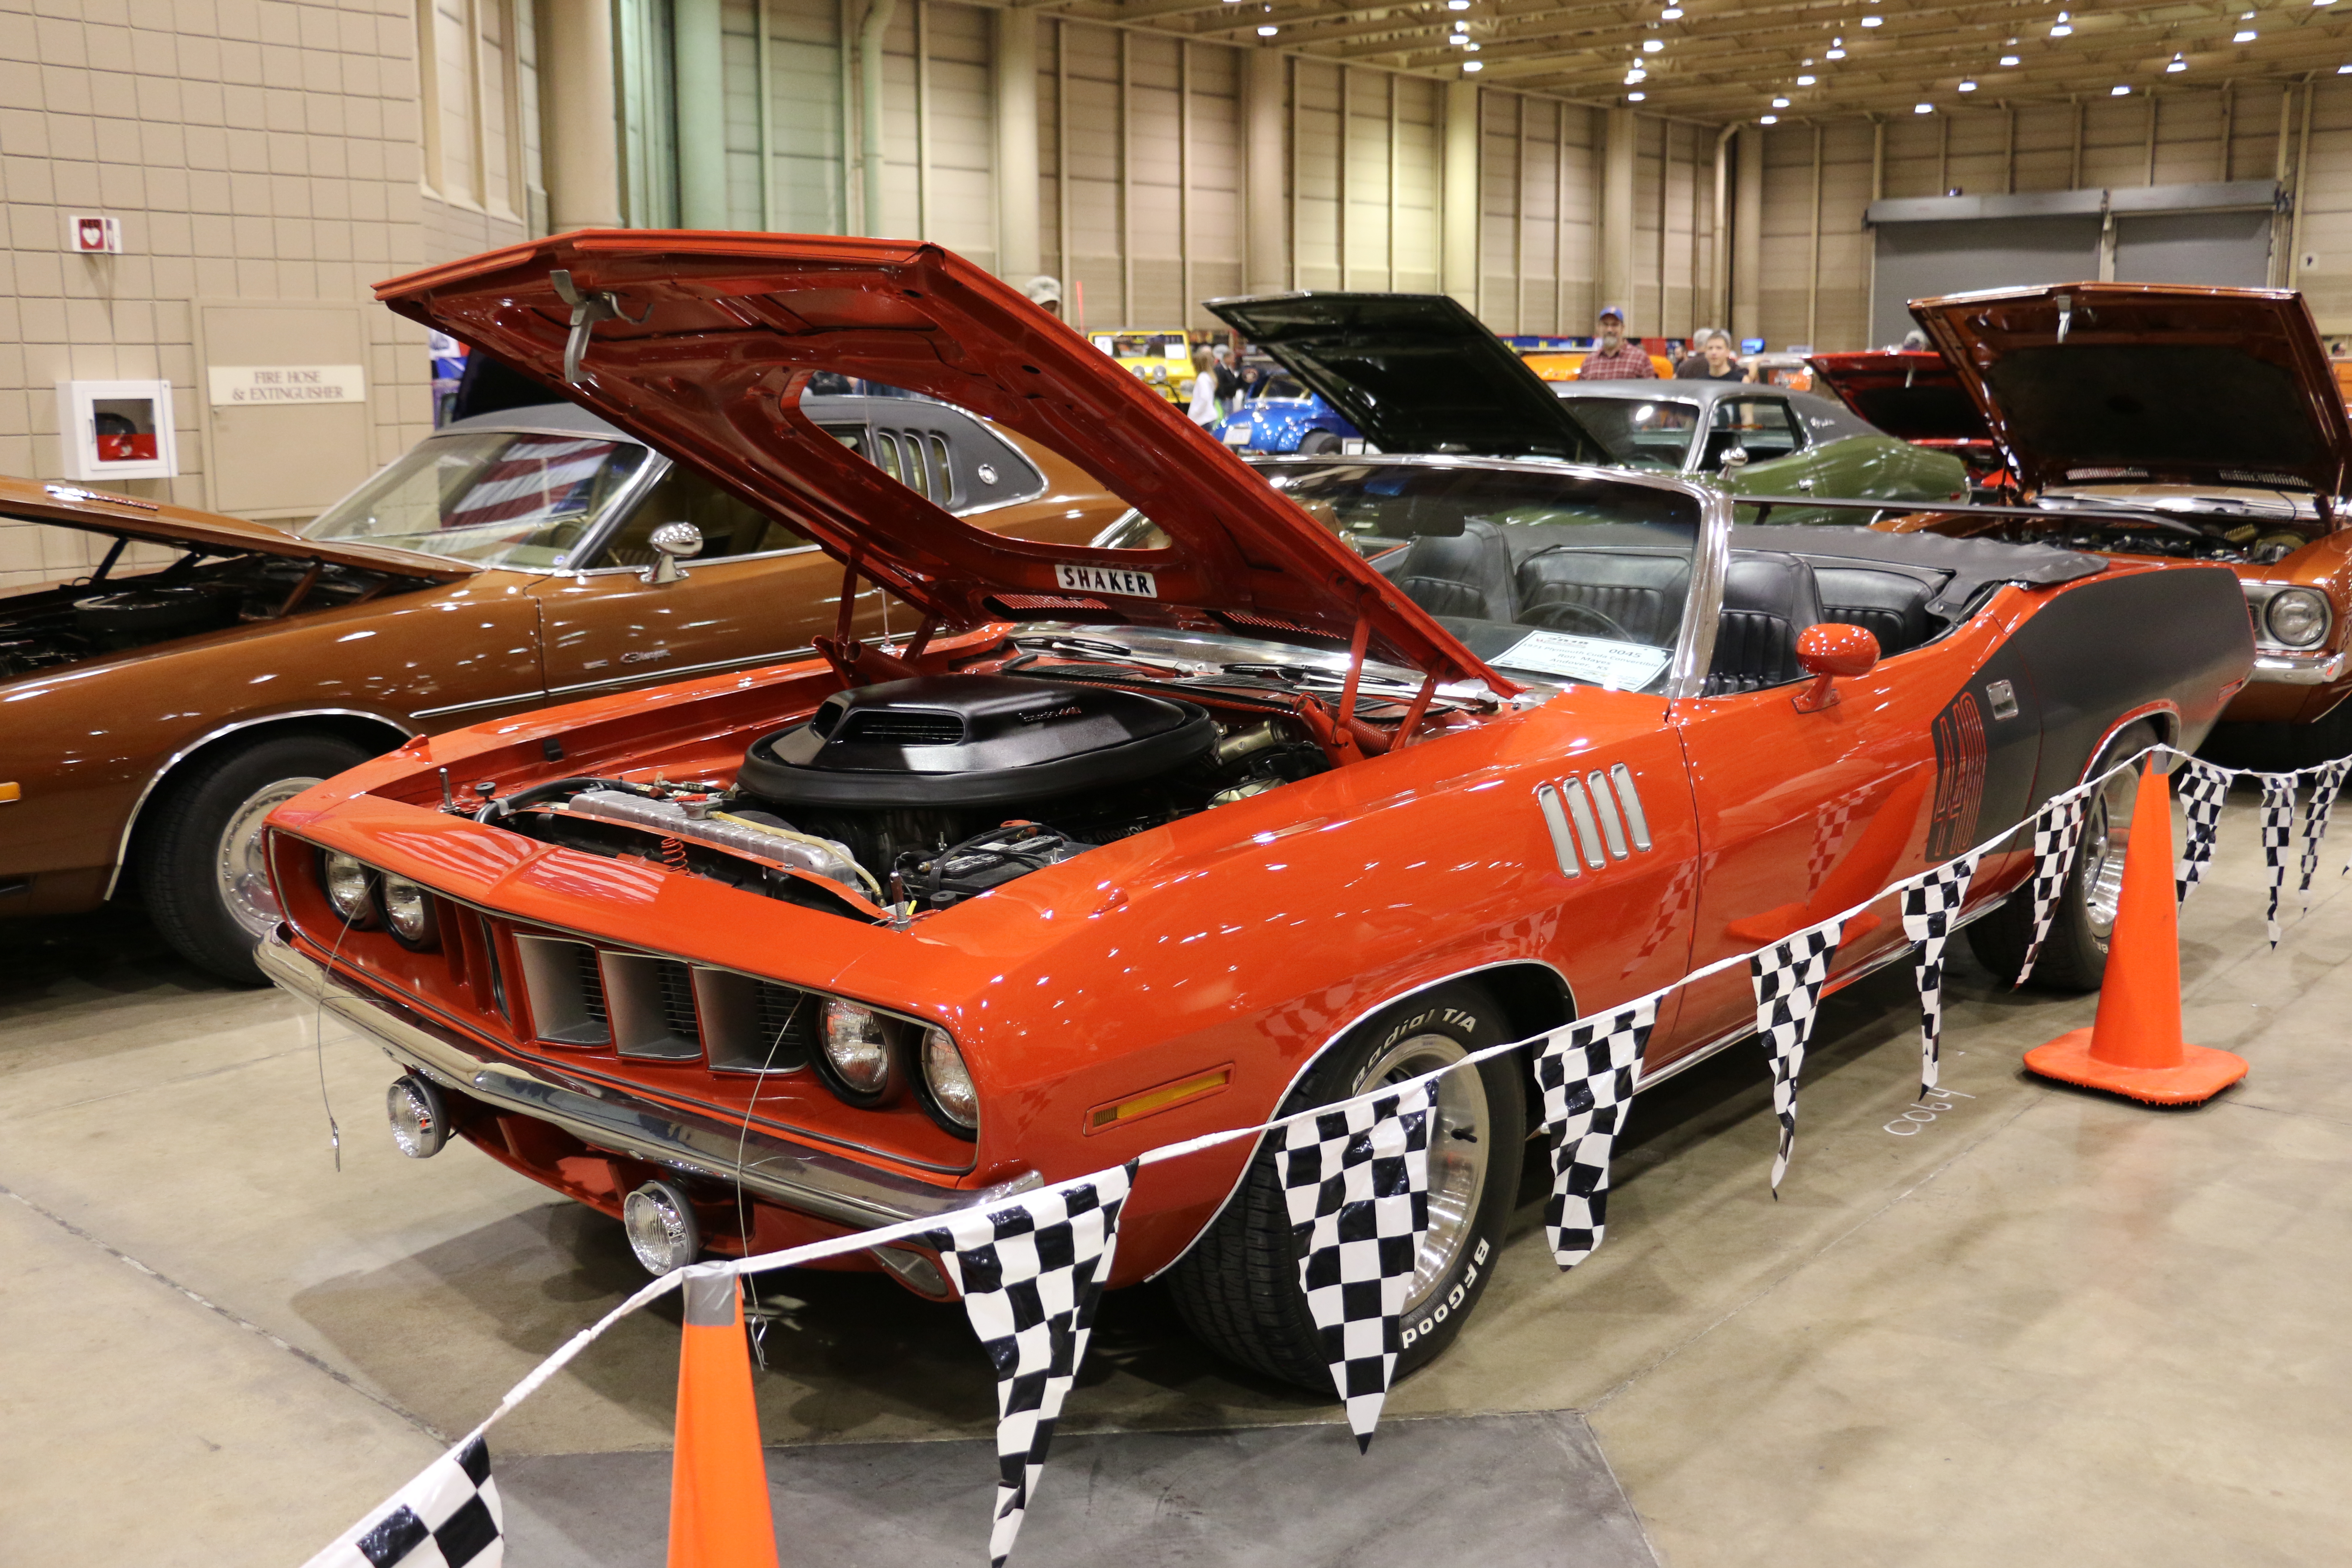 Cars For Charities: Rod & Custom Car Show in Wichita KS sees hundreds of amazing classic muscle cars and modern favorites